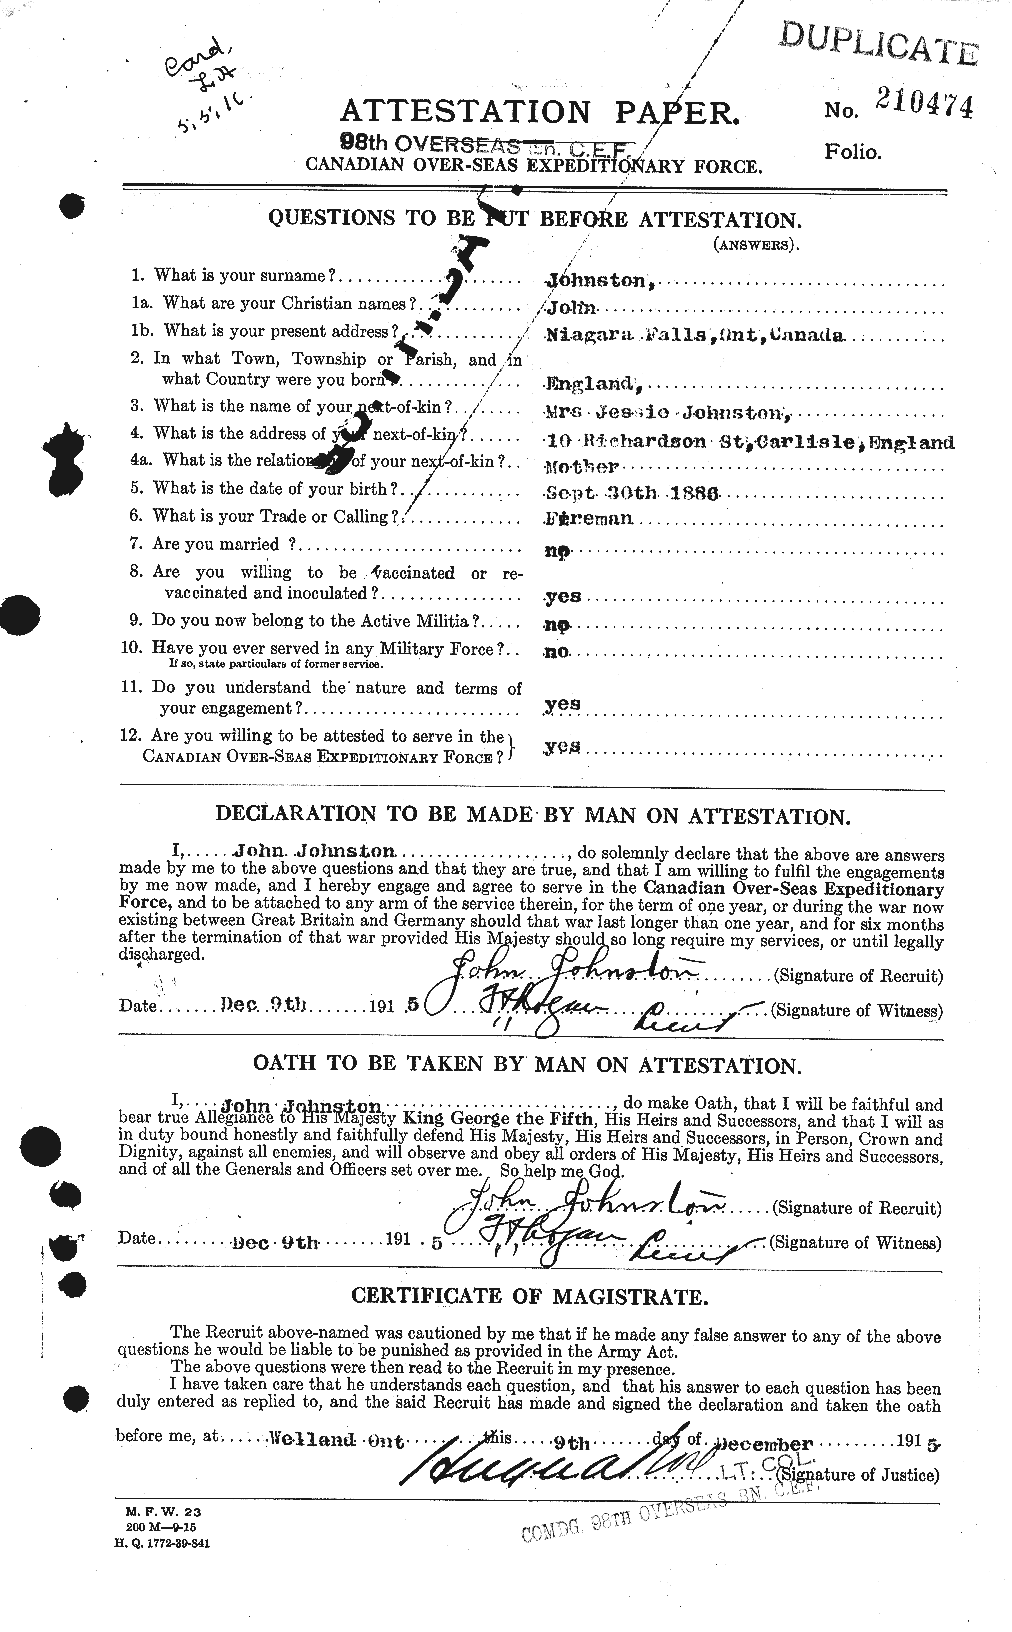 Personnel Records of the First World War - CEF 422775a